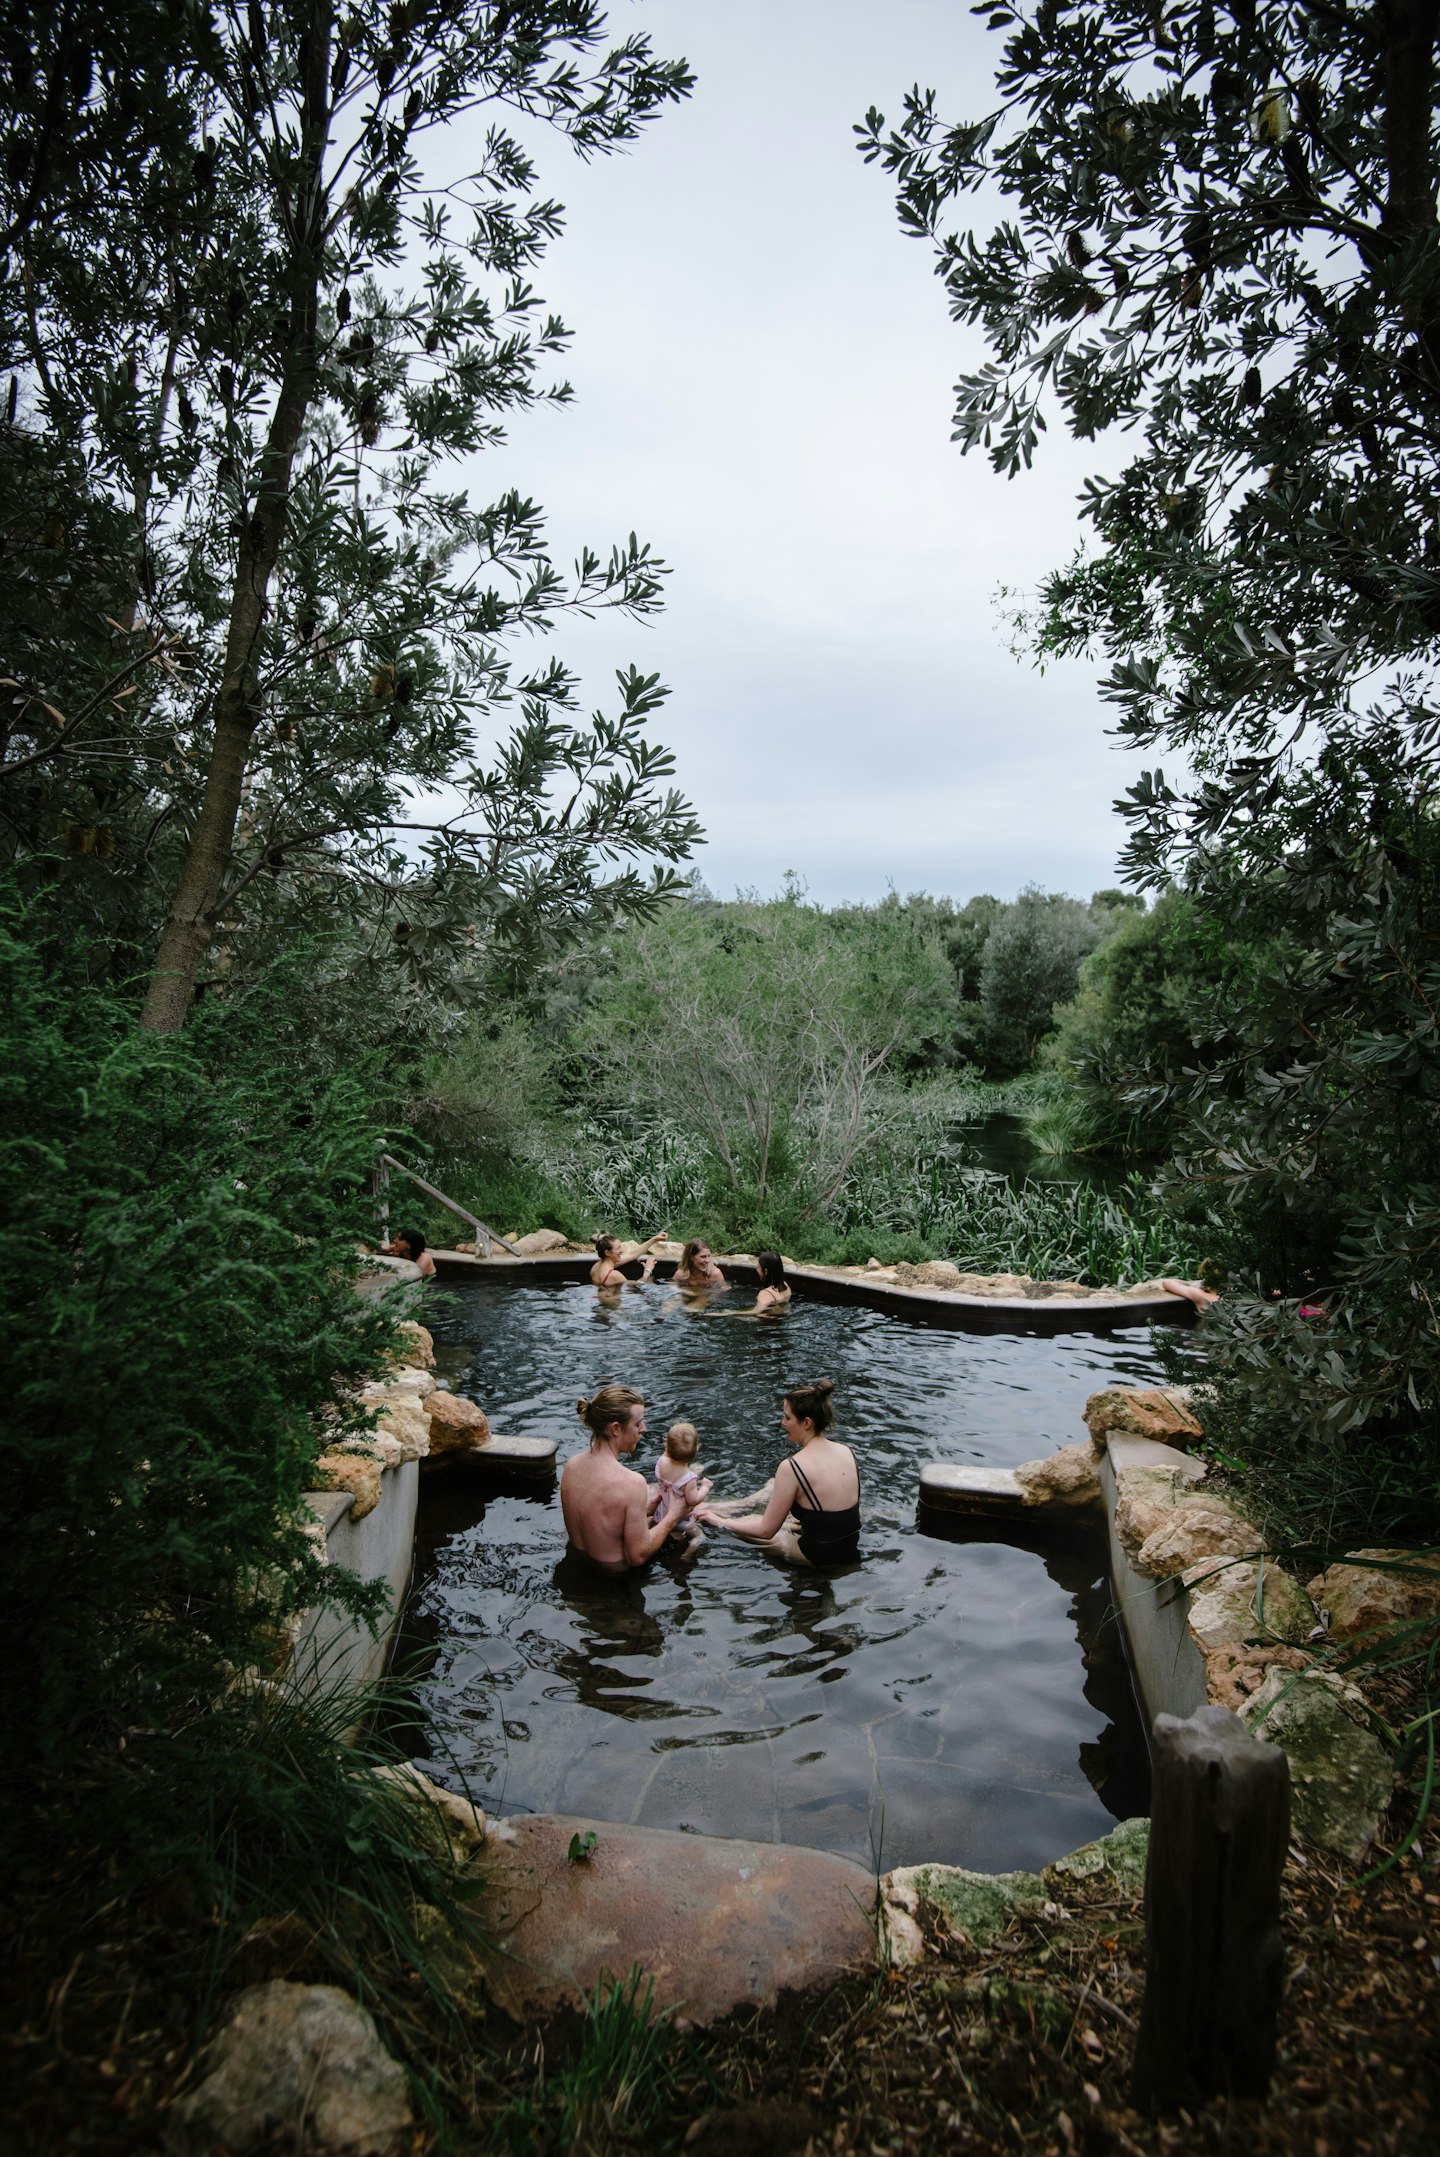 families bathing in geothermal pool surrounded by trees